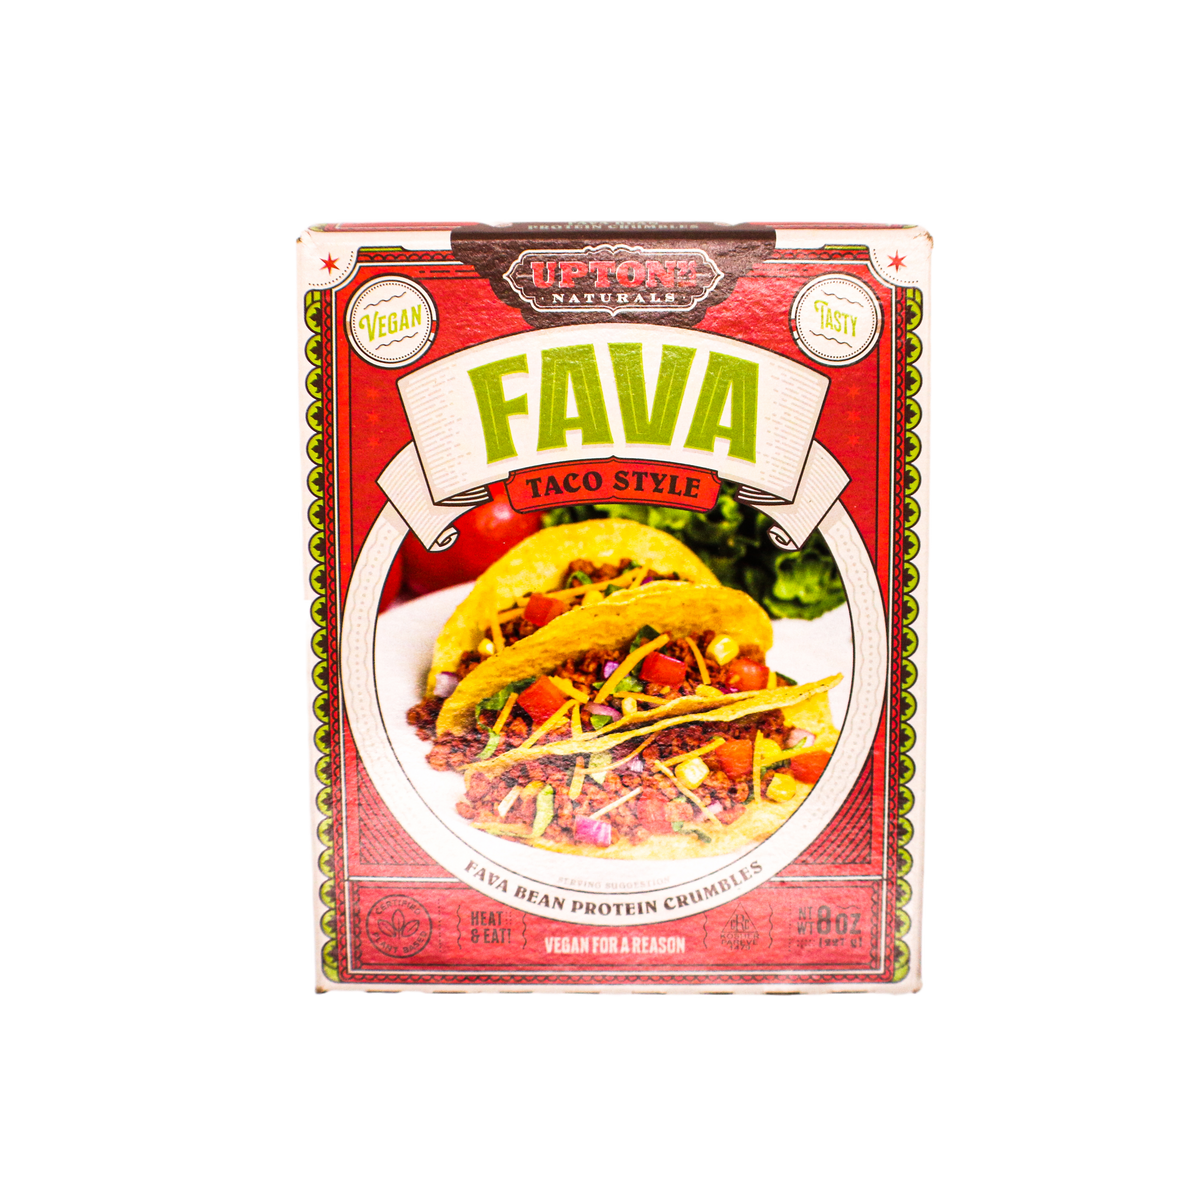 Uptons Naturals Taco Style Fava Crumbles